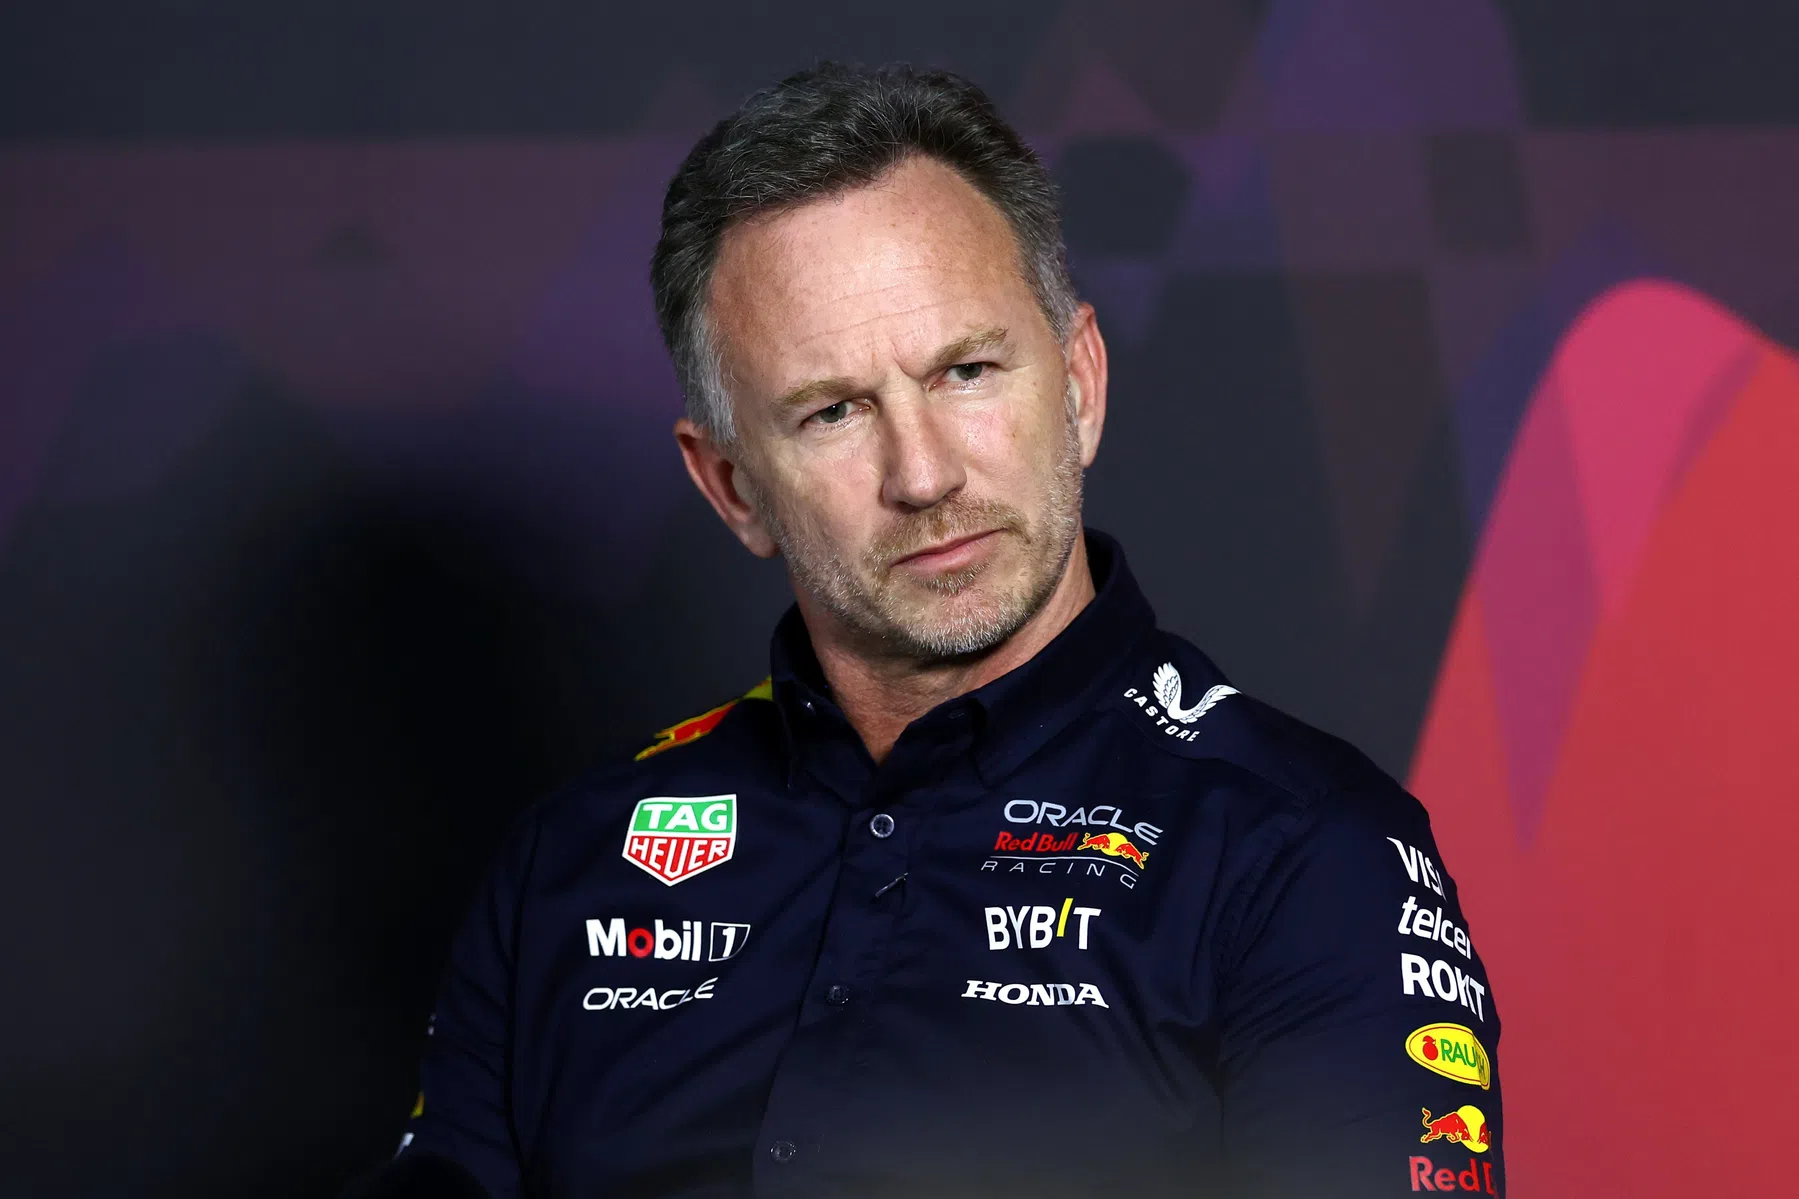 reason why Red Bull suspended the employee who accused Horner